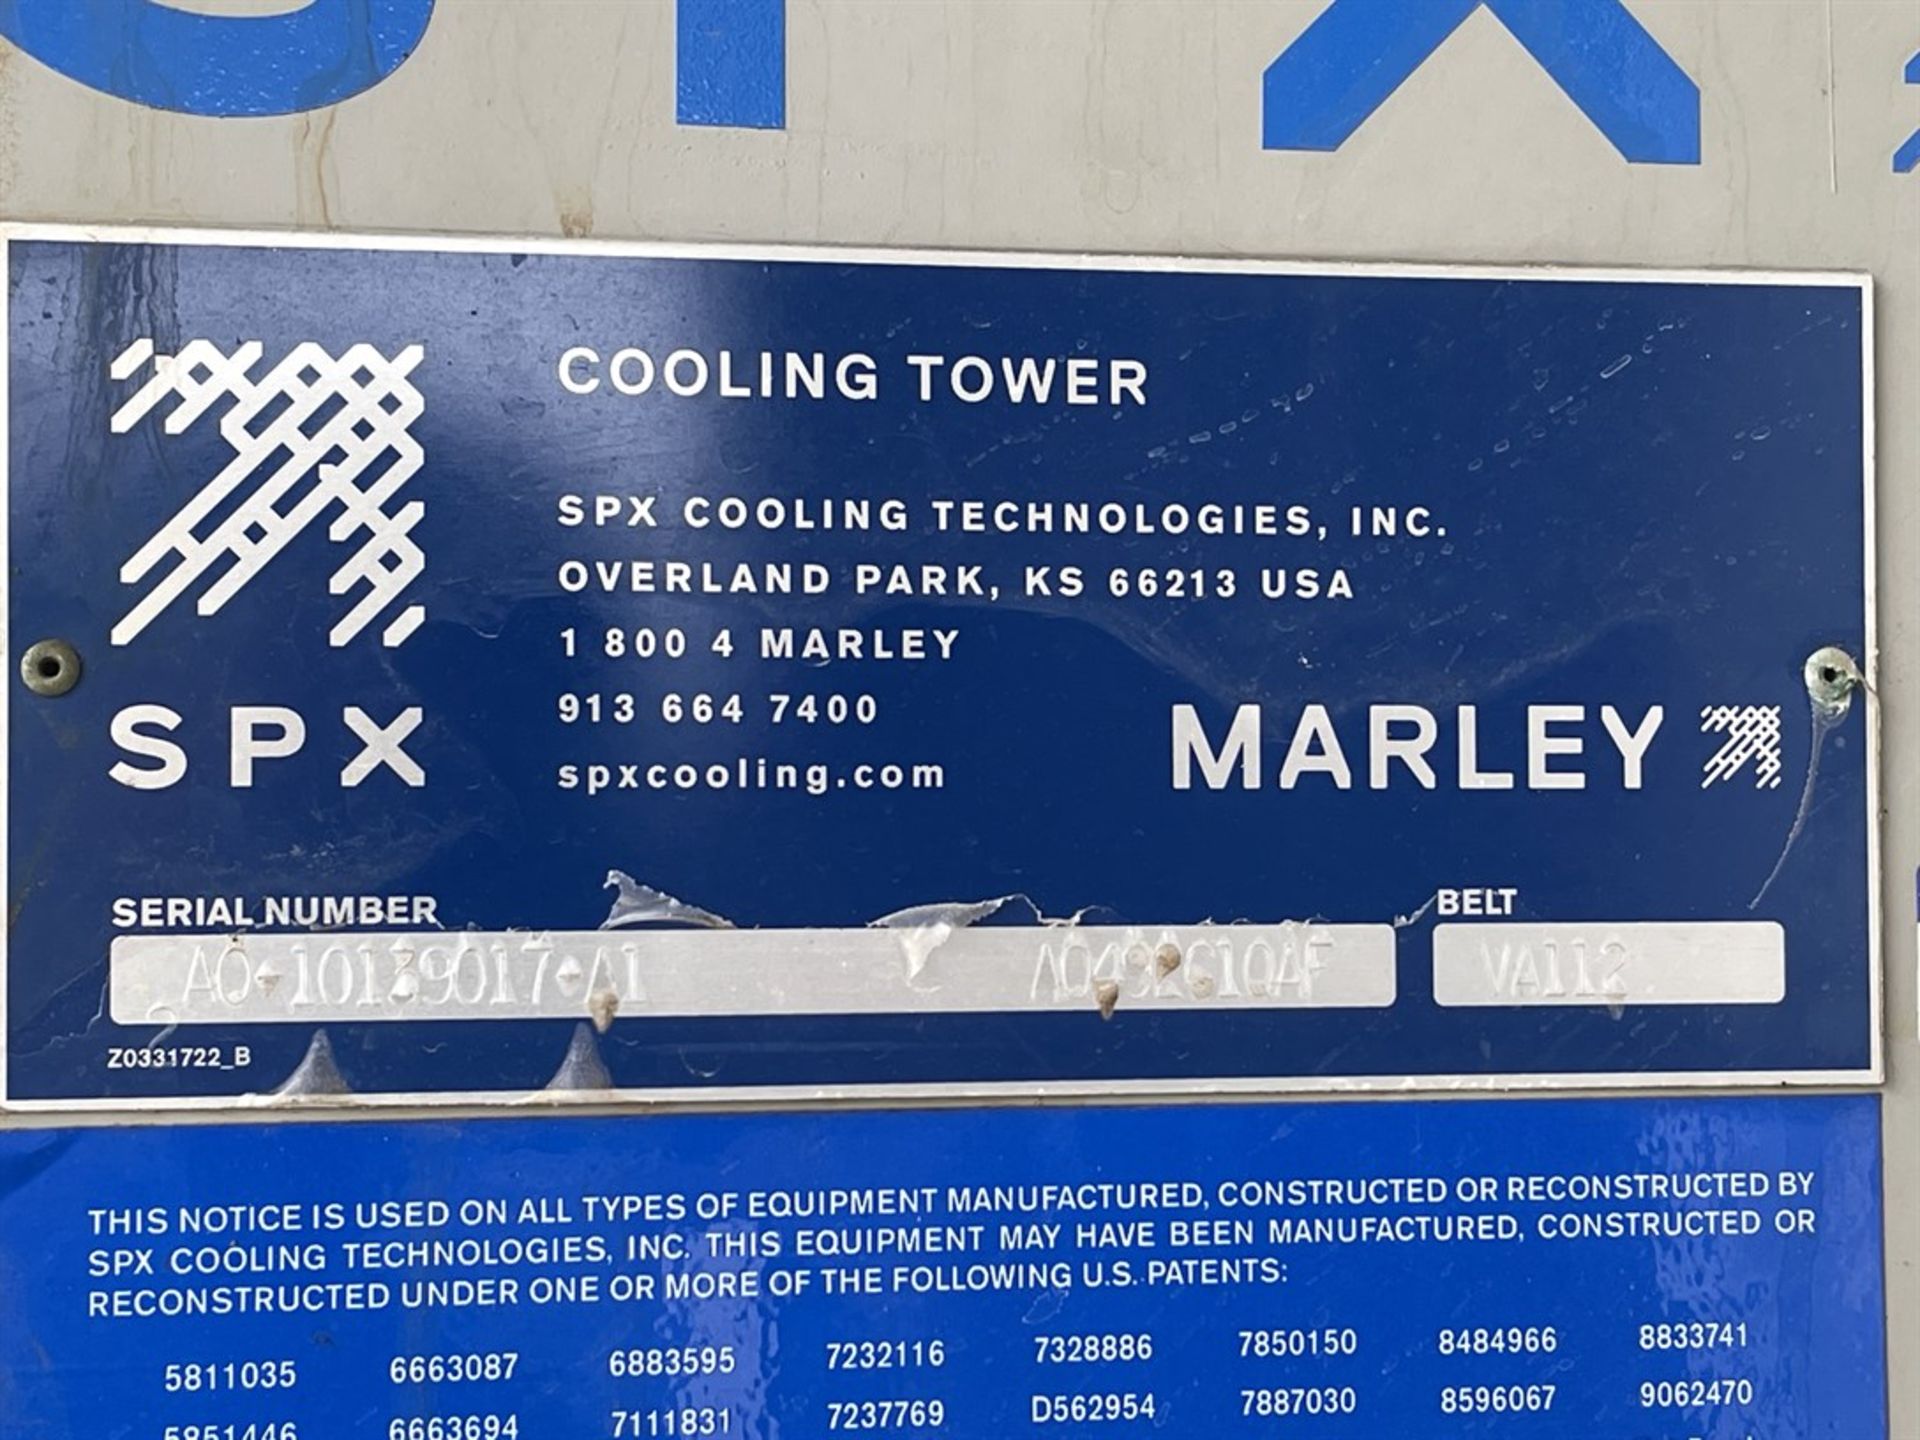 Marley SPX Cooling Tower, s/n AO-10139017-A1 - Image 2 of 4